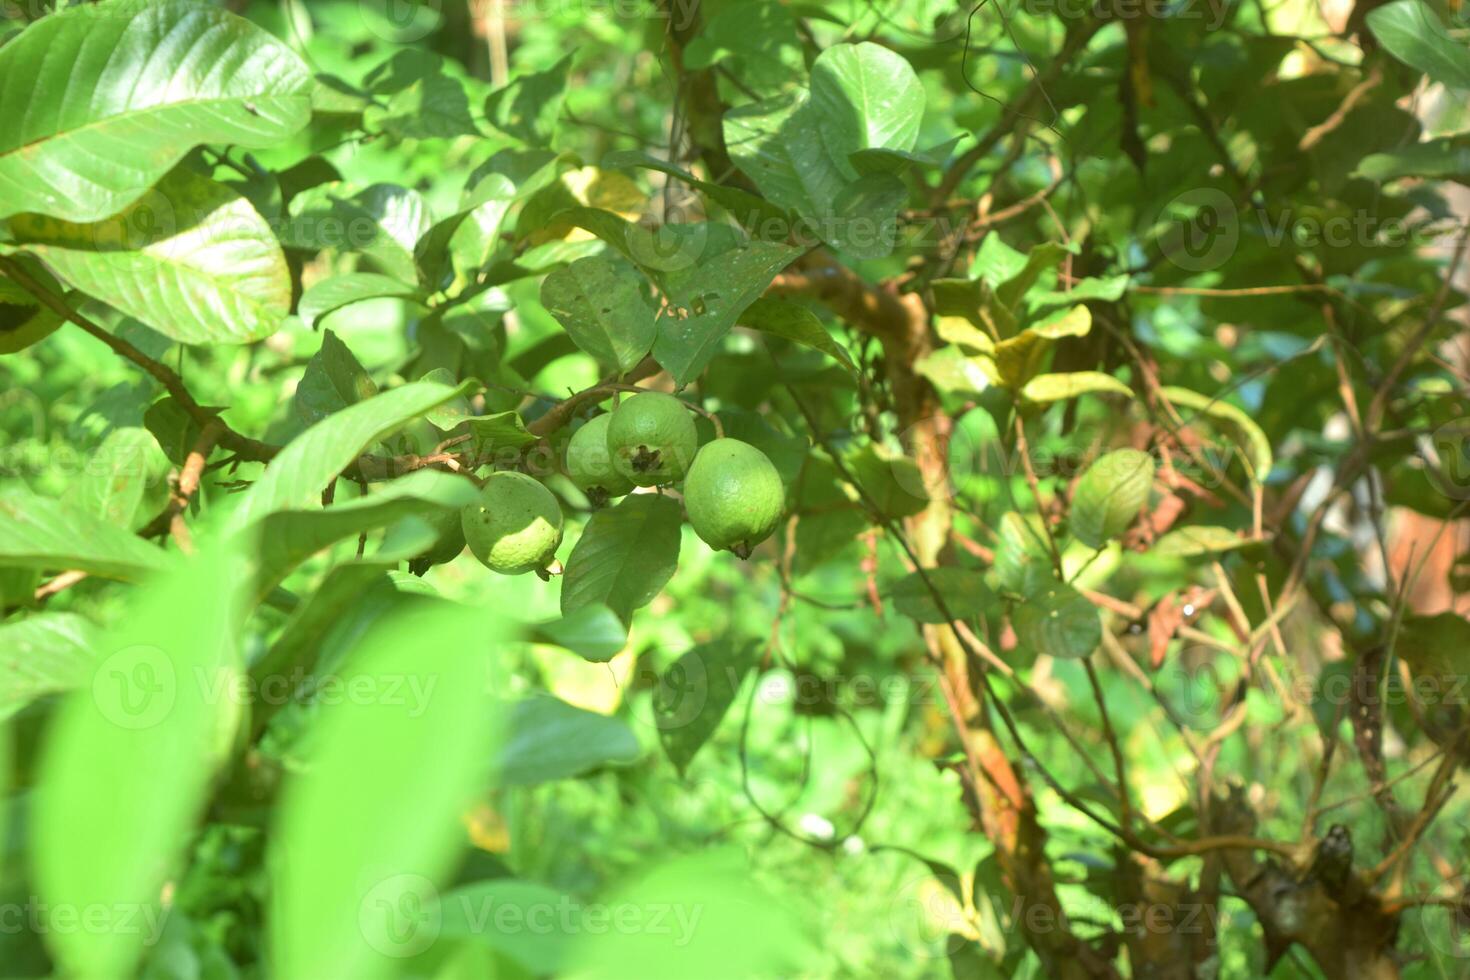 Young guavas start growing in the garden photo